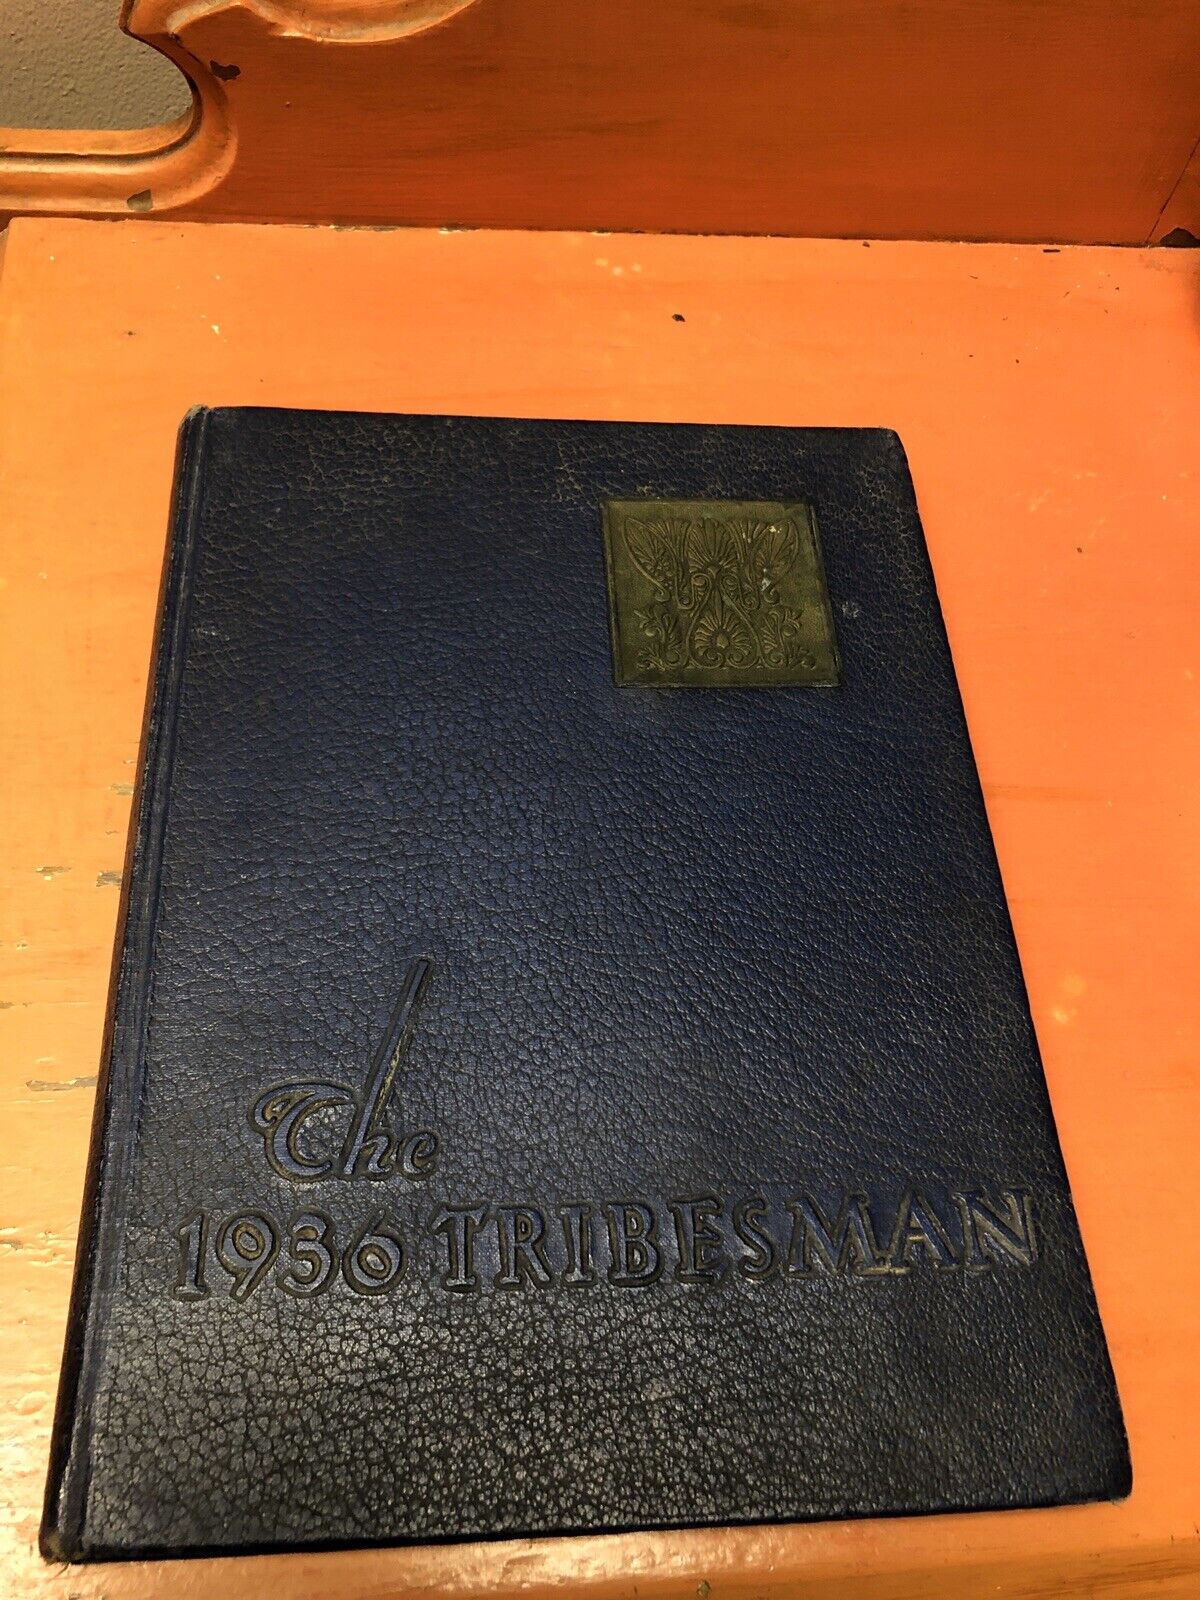 Mississippi College Yearbook 1936 Clinton Tribesman missing tipped in pictures